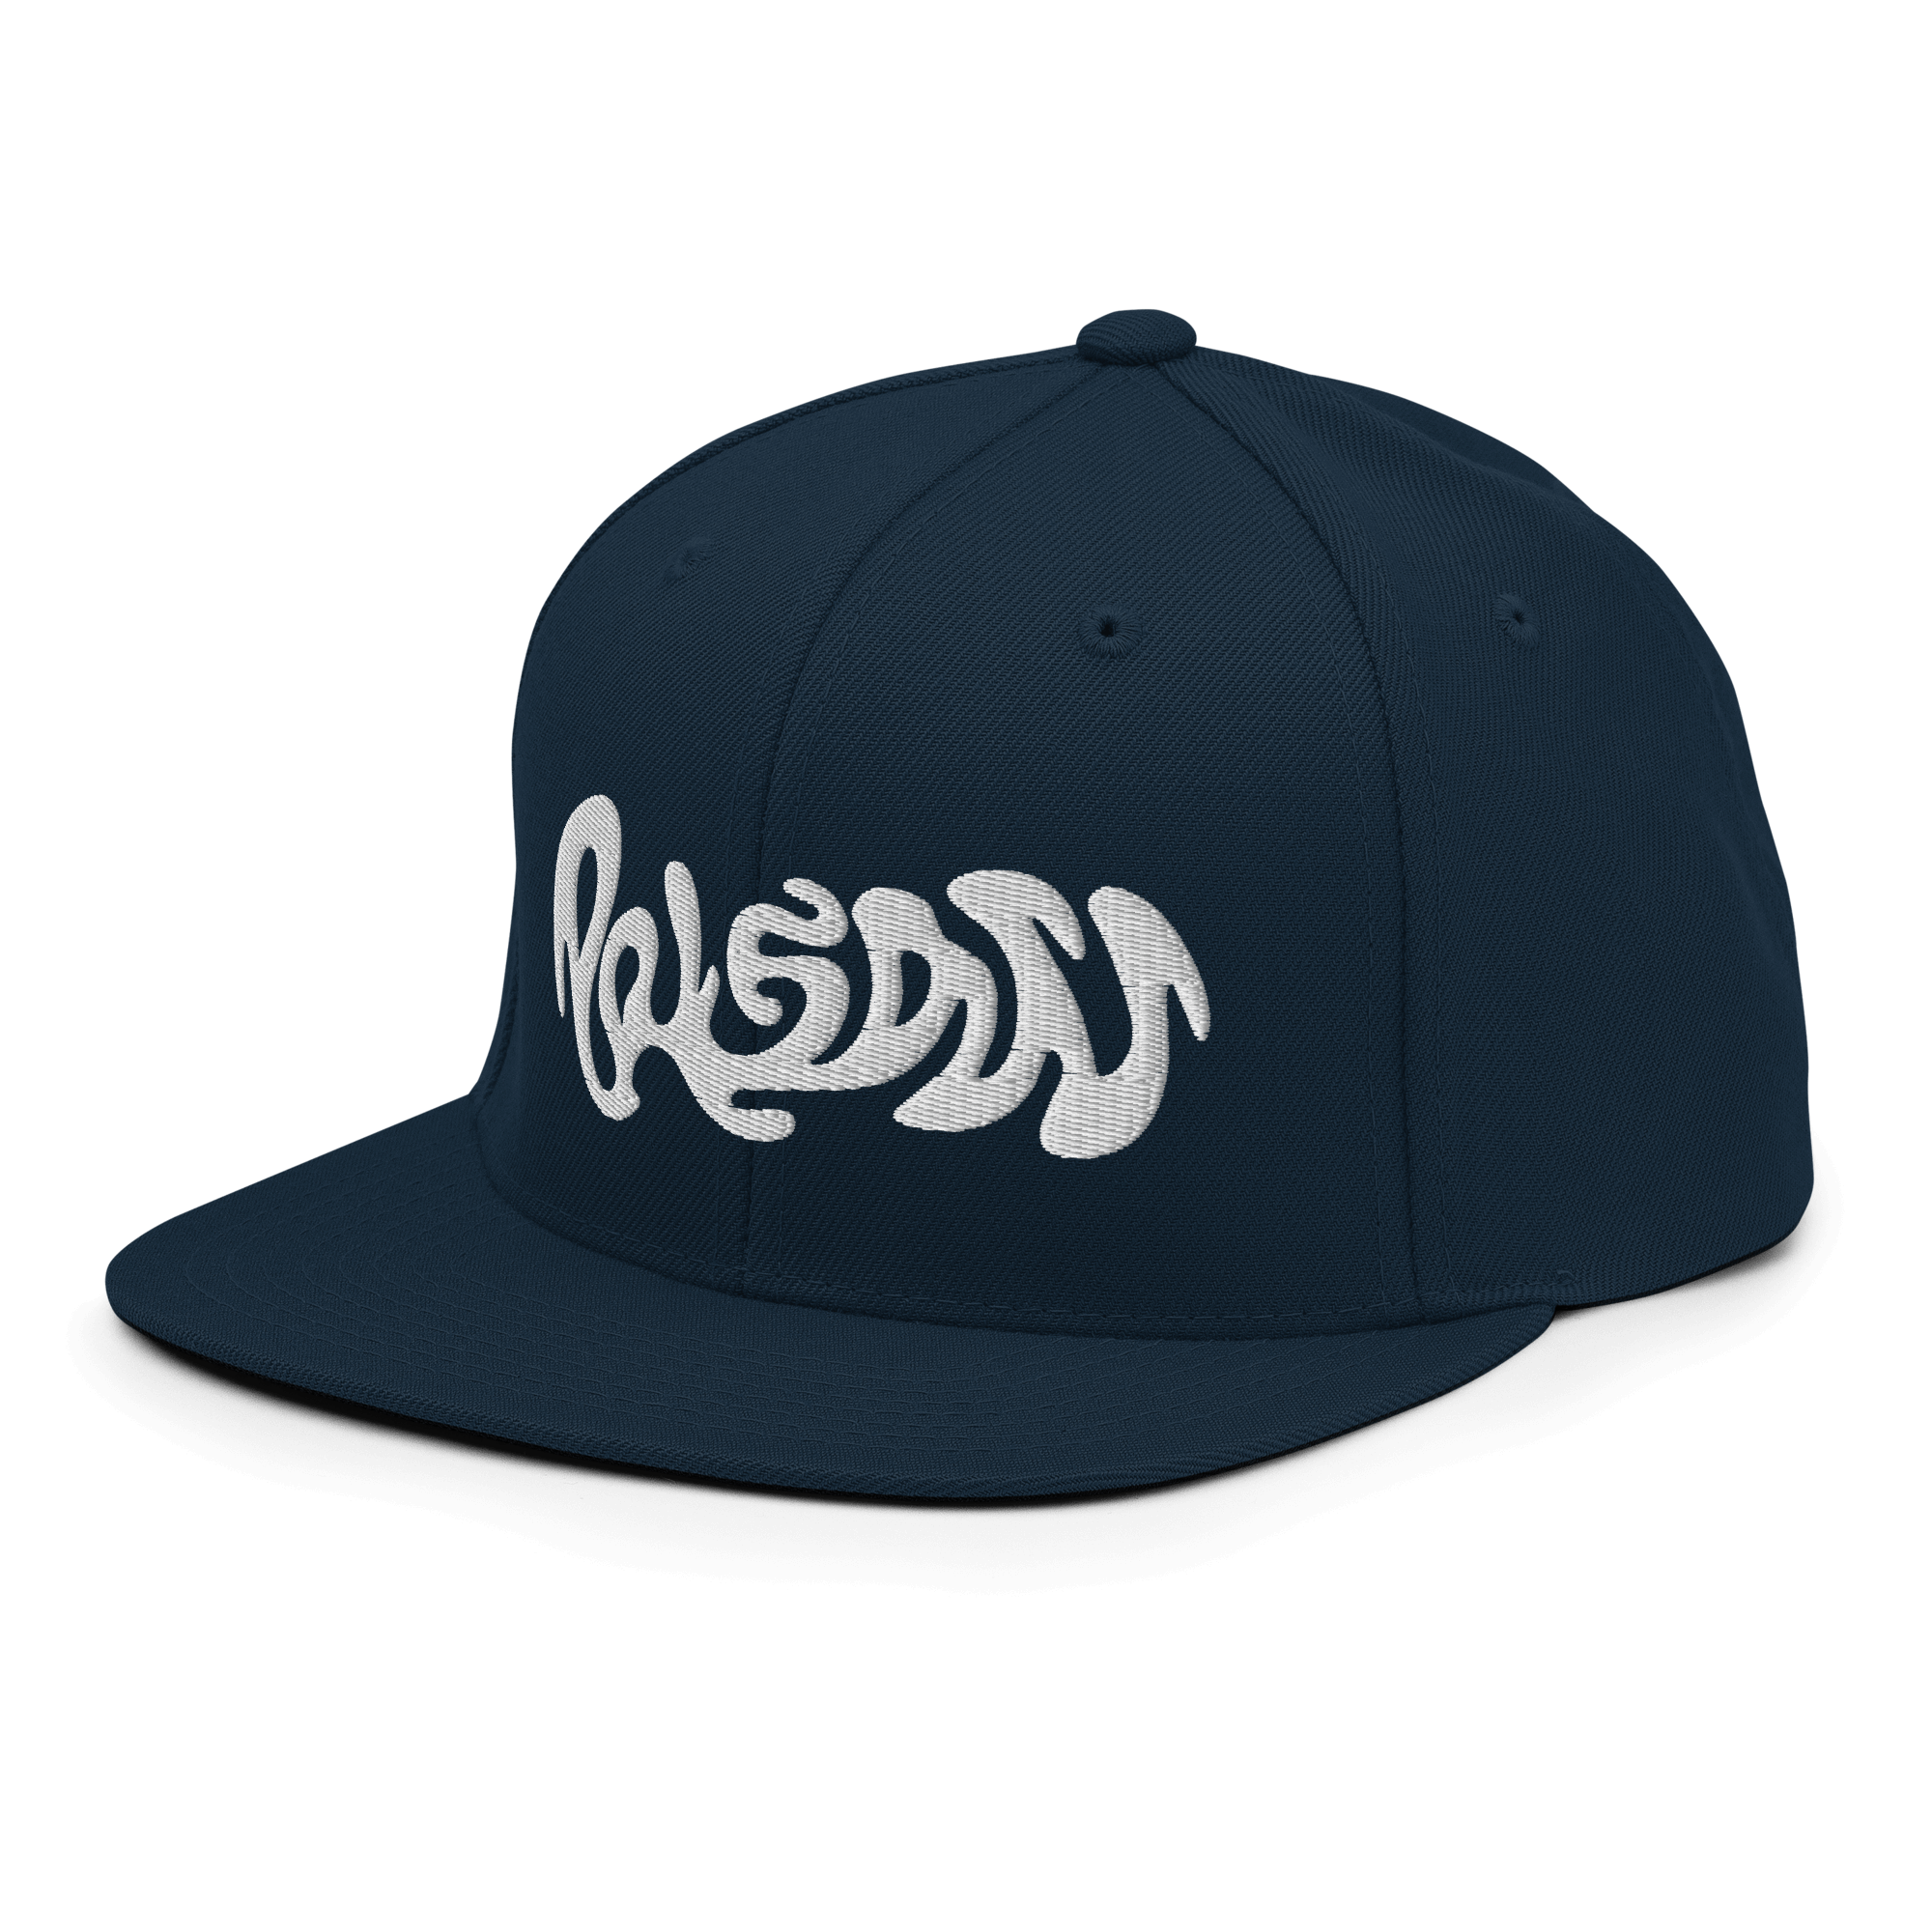 Poison Snapback CapUnleash your style with the Poison Snapback Cap – a classic fit, flat brim, and full buckram structure for timeless cool. The adjustable snap closure ensures comfort in a one-size-fits-most design. Crafted exclusively for you upon order